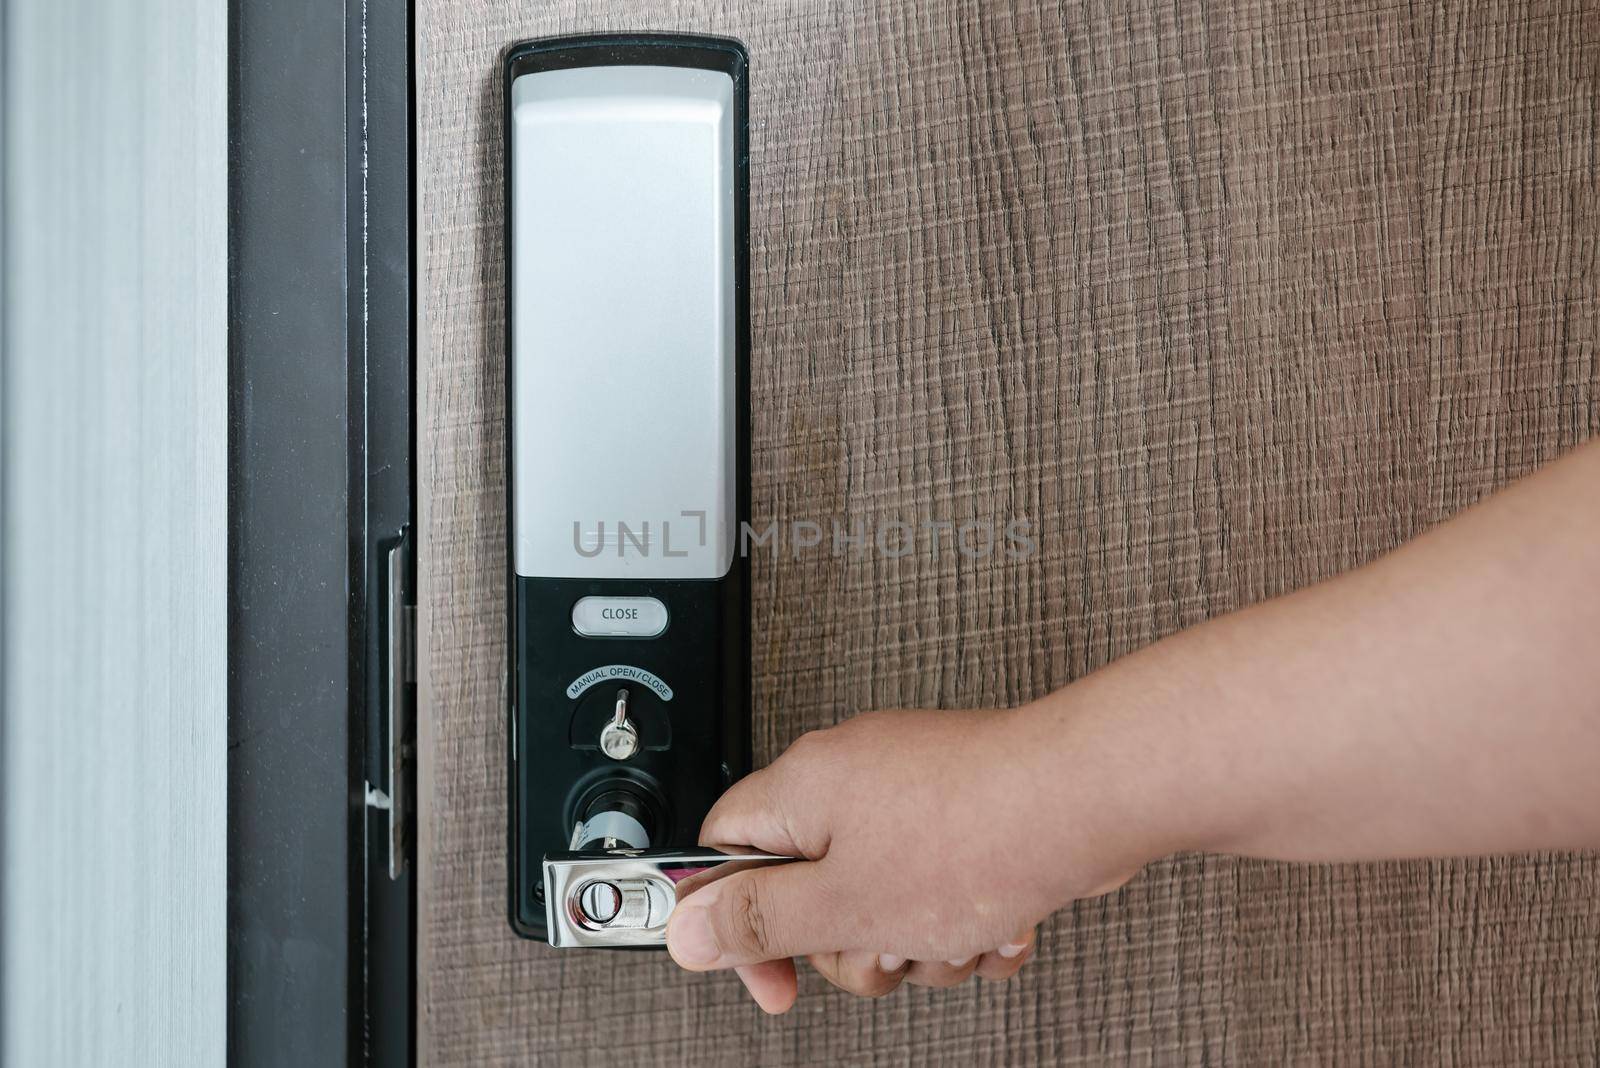 Woman Hand is Holding Door Handle While Opening a Door for Access Apartment Building. Electric Door With Keypad Code for Security System in Apartments Room. Electronic Door for Entrance-Exit Building.